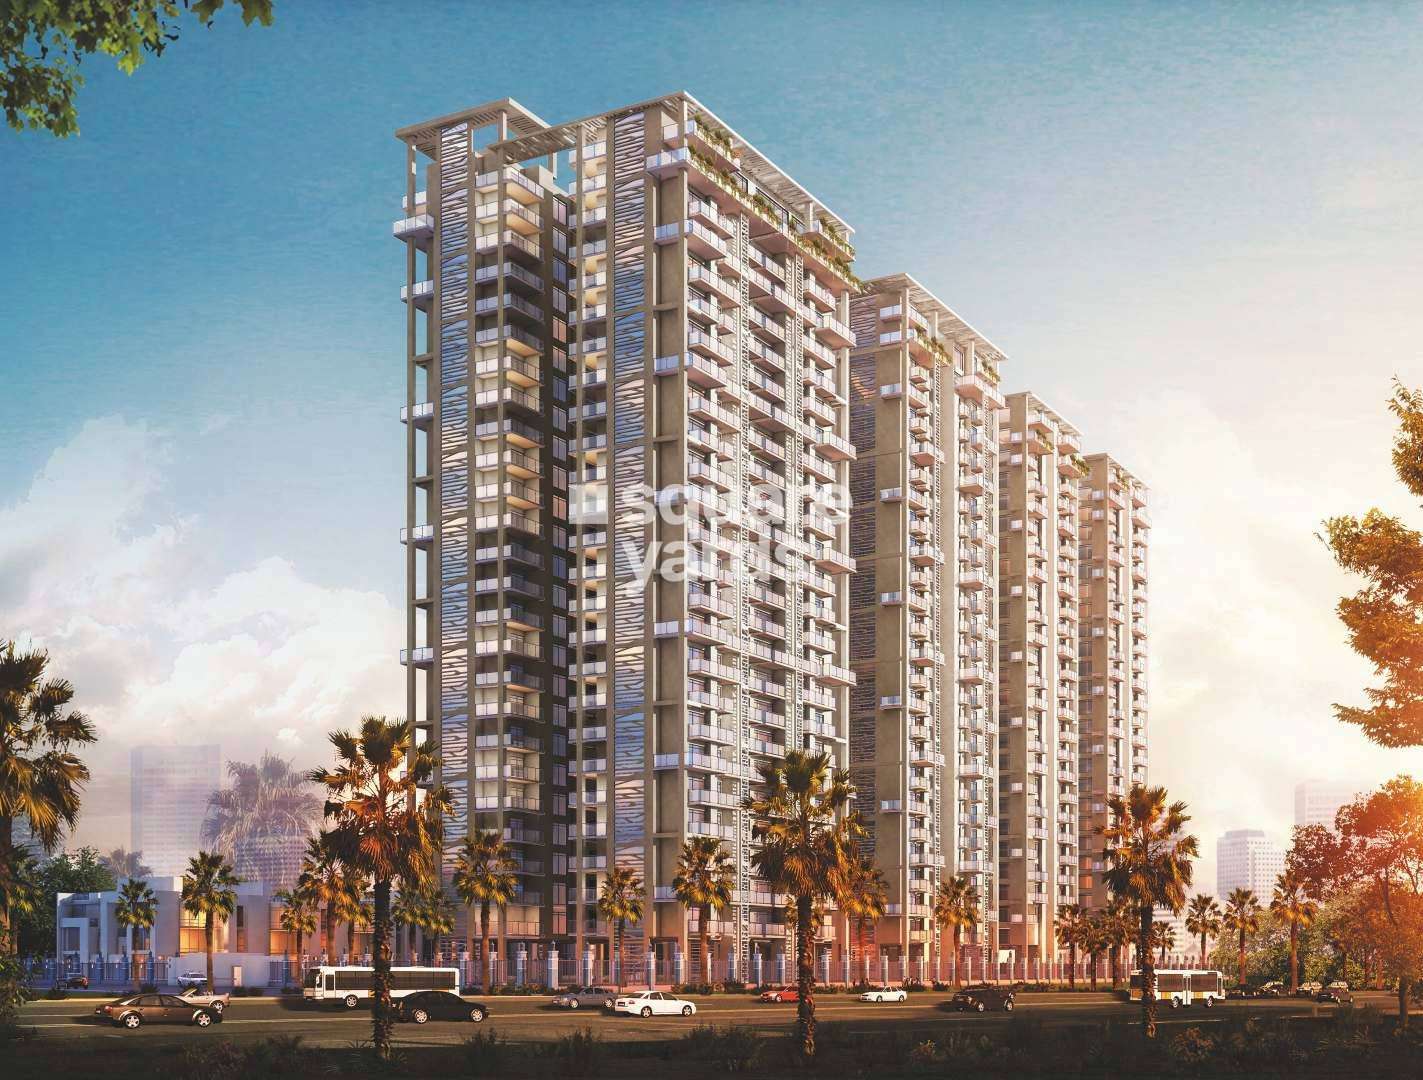 sikka kimaantra greens project tower view1 8102